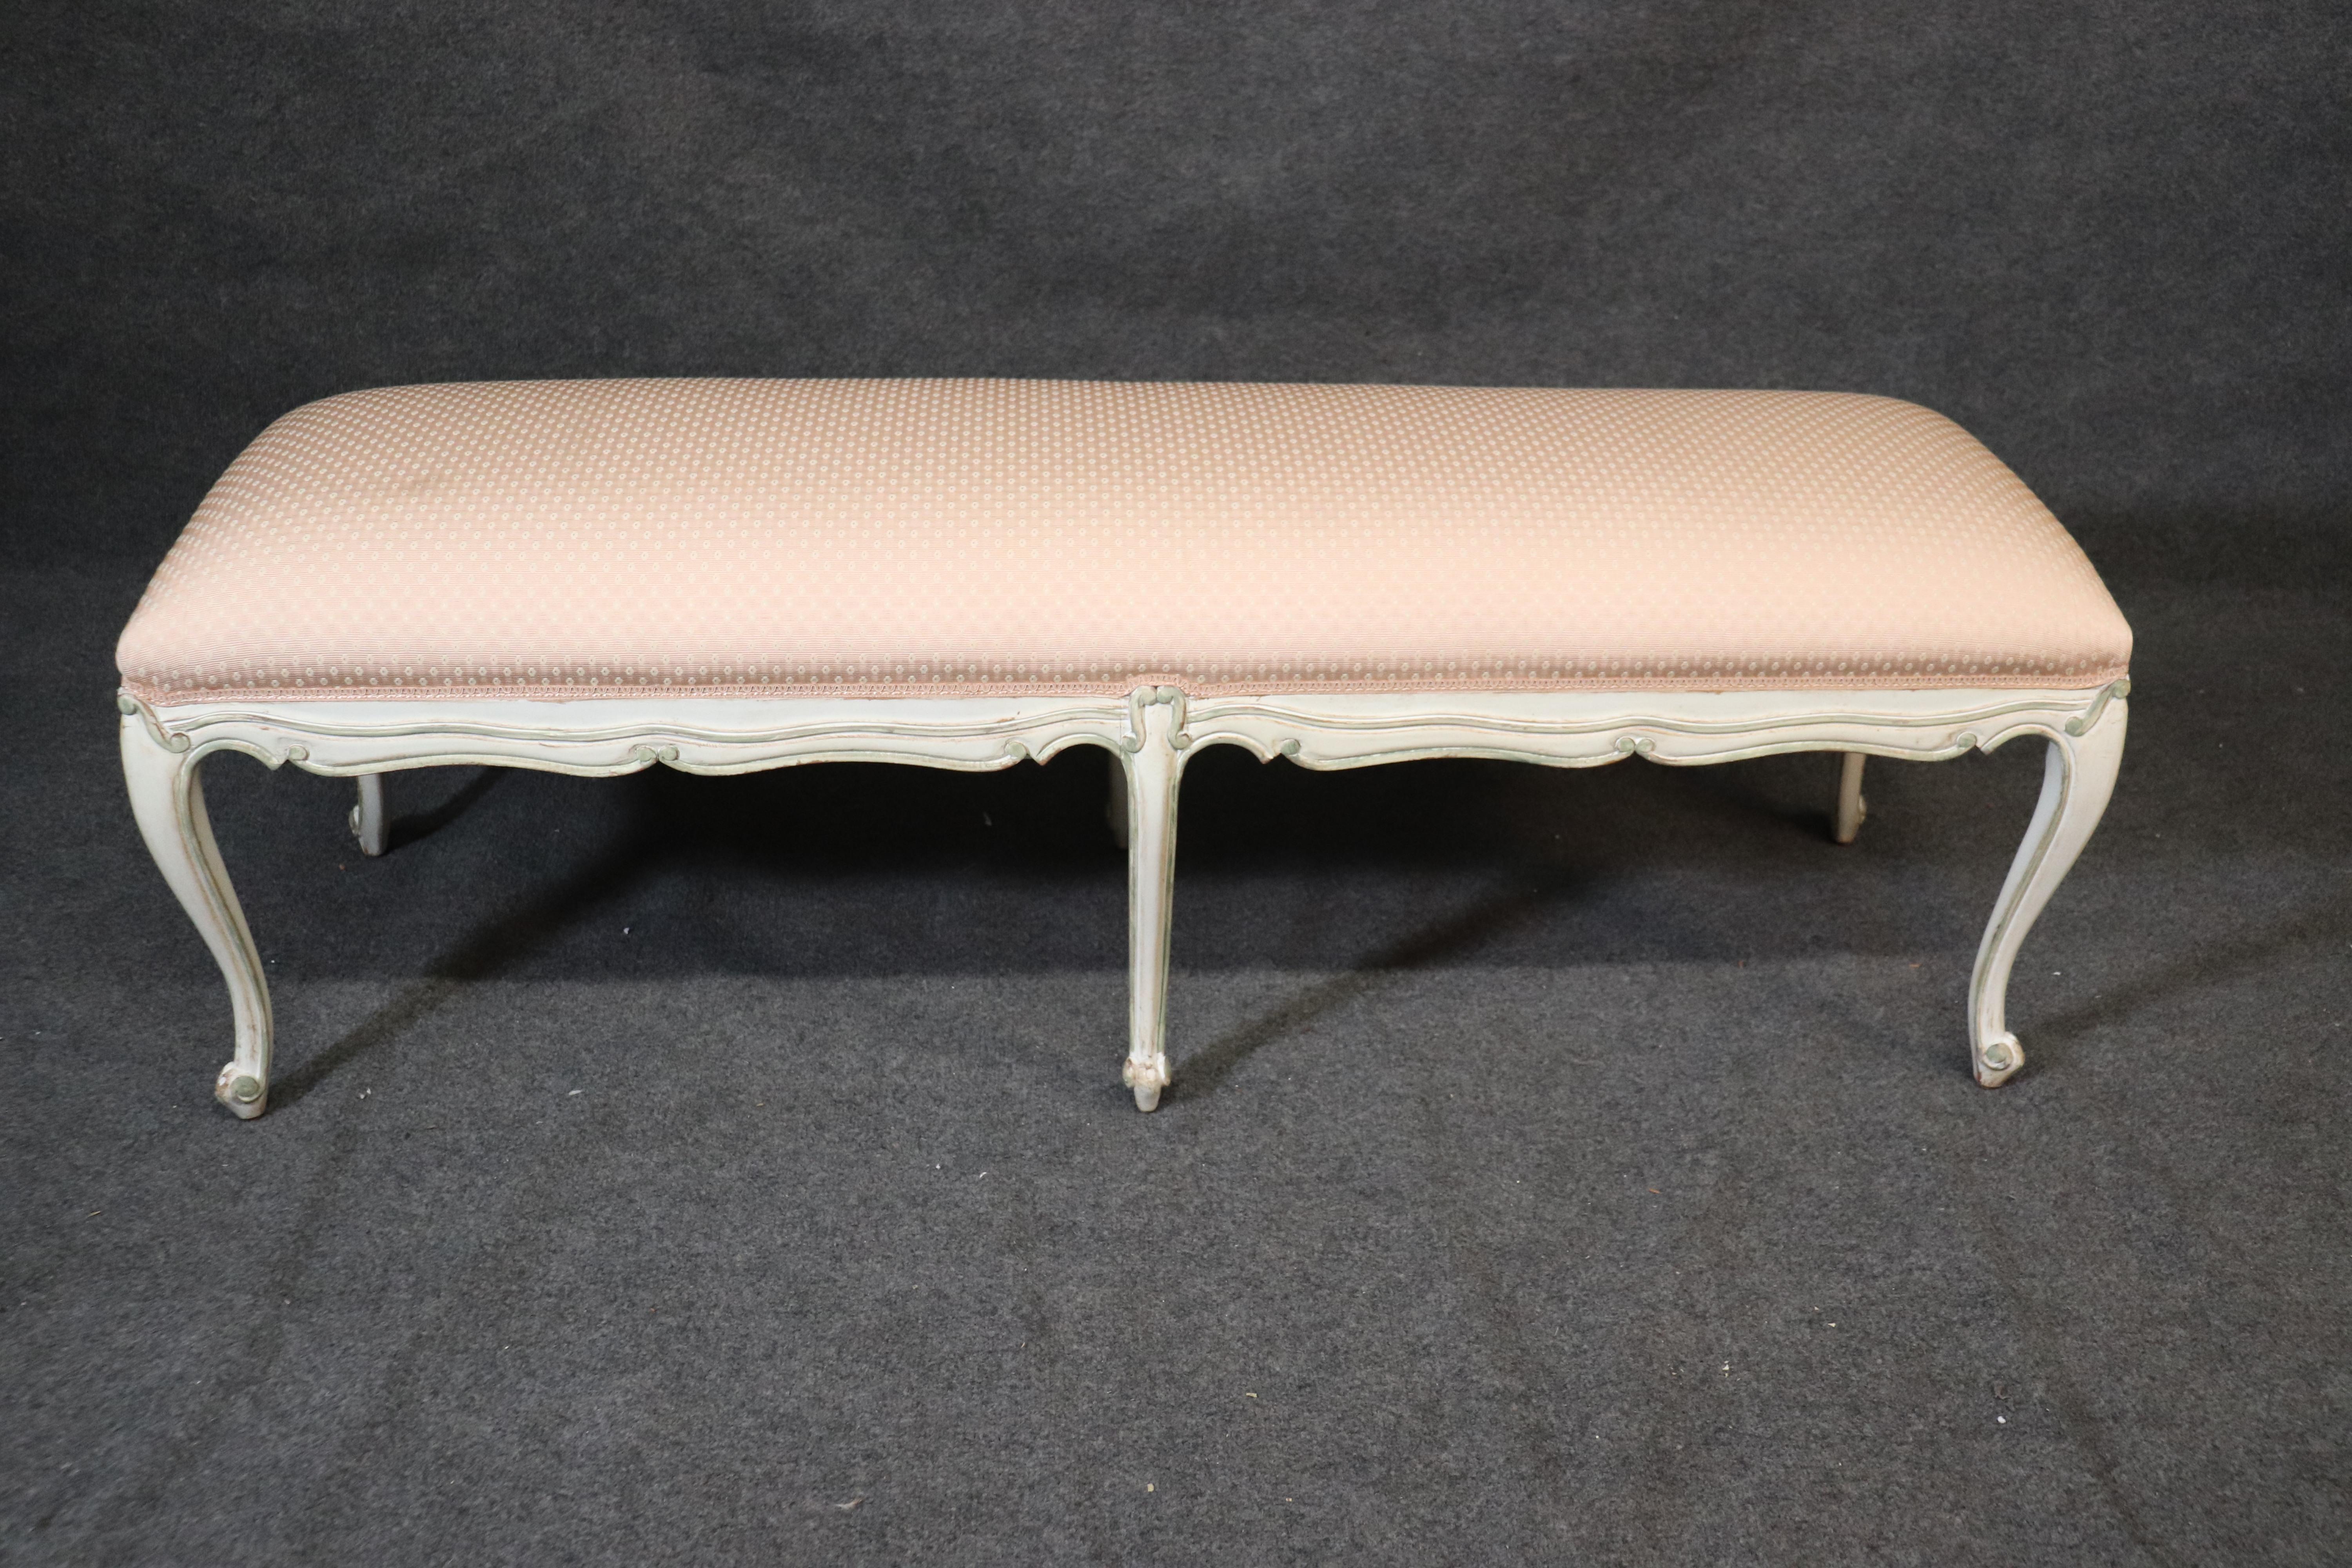 This is a nice French Louis XV painted window bench. There is an old stain on the cushion but it is in otherwise good vintage condition. Dates to the 1960s and measures: 58 wide x 18 deep x 20 inches tall.